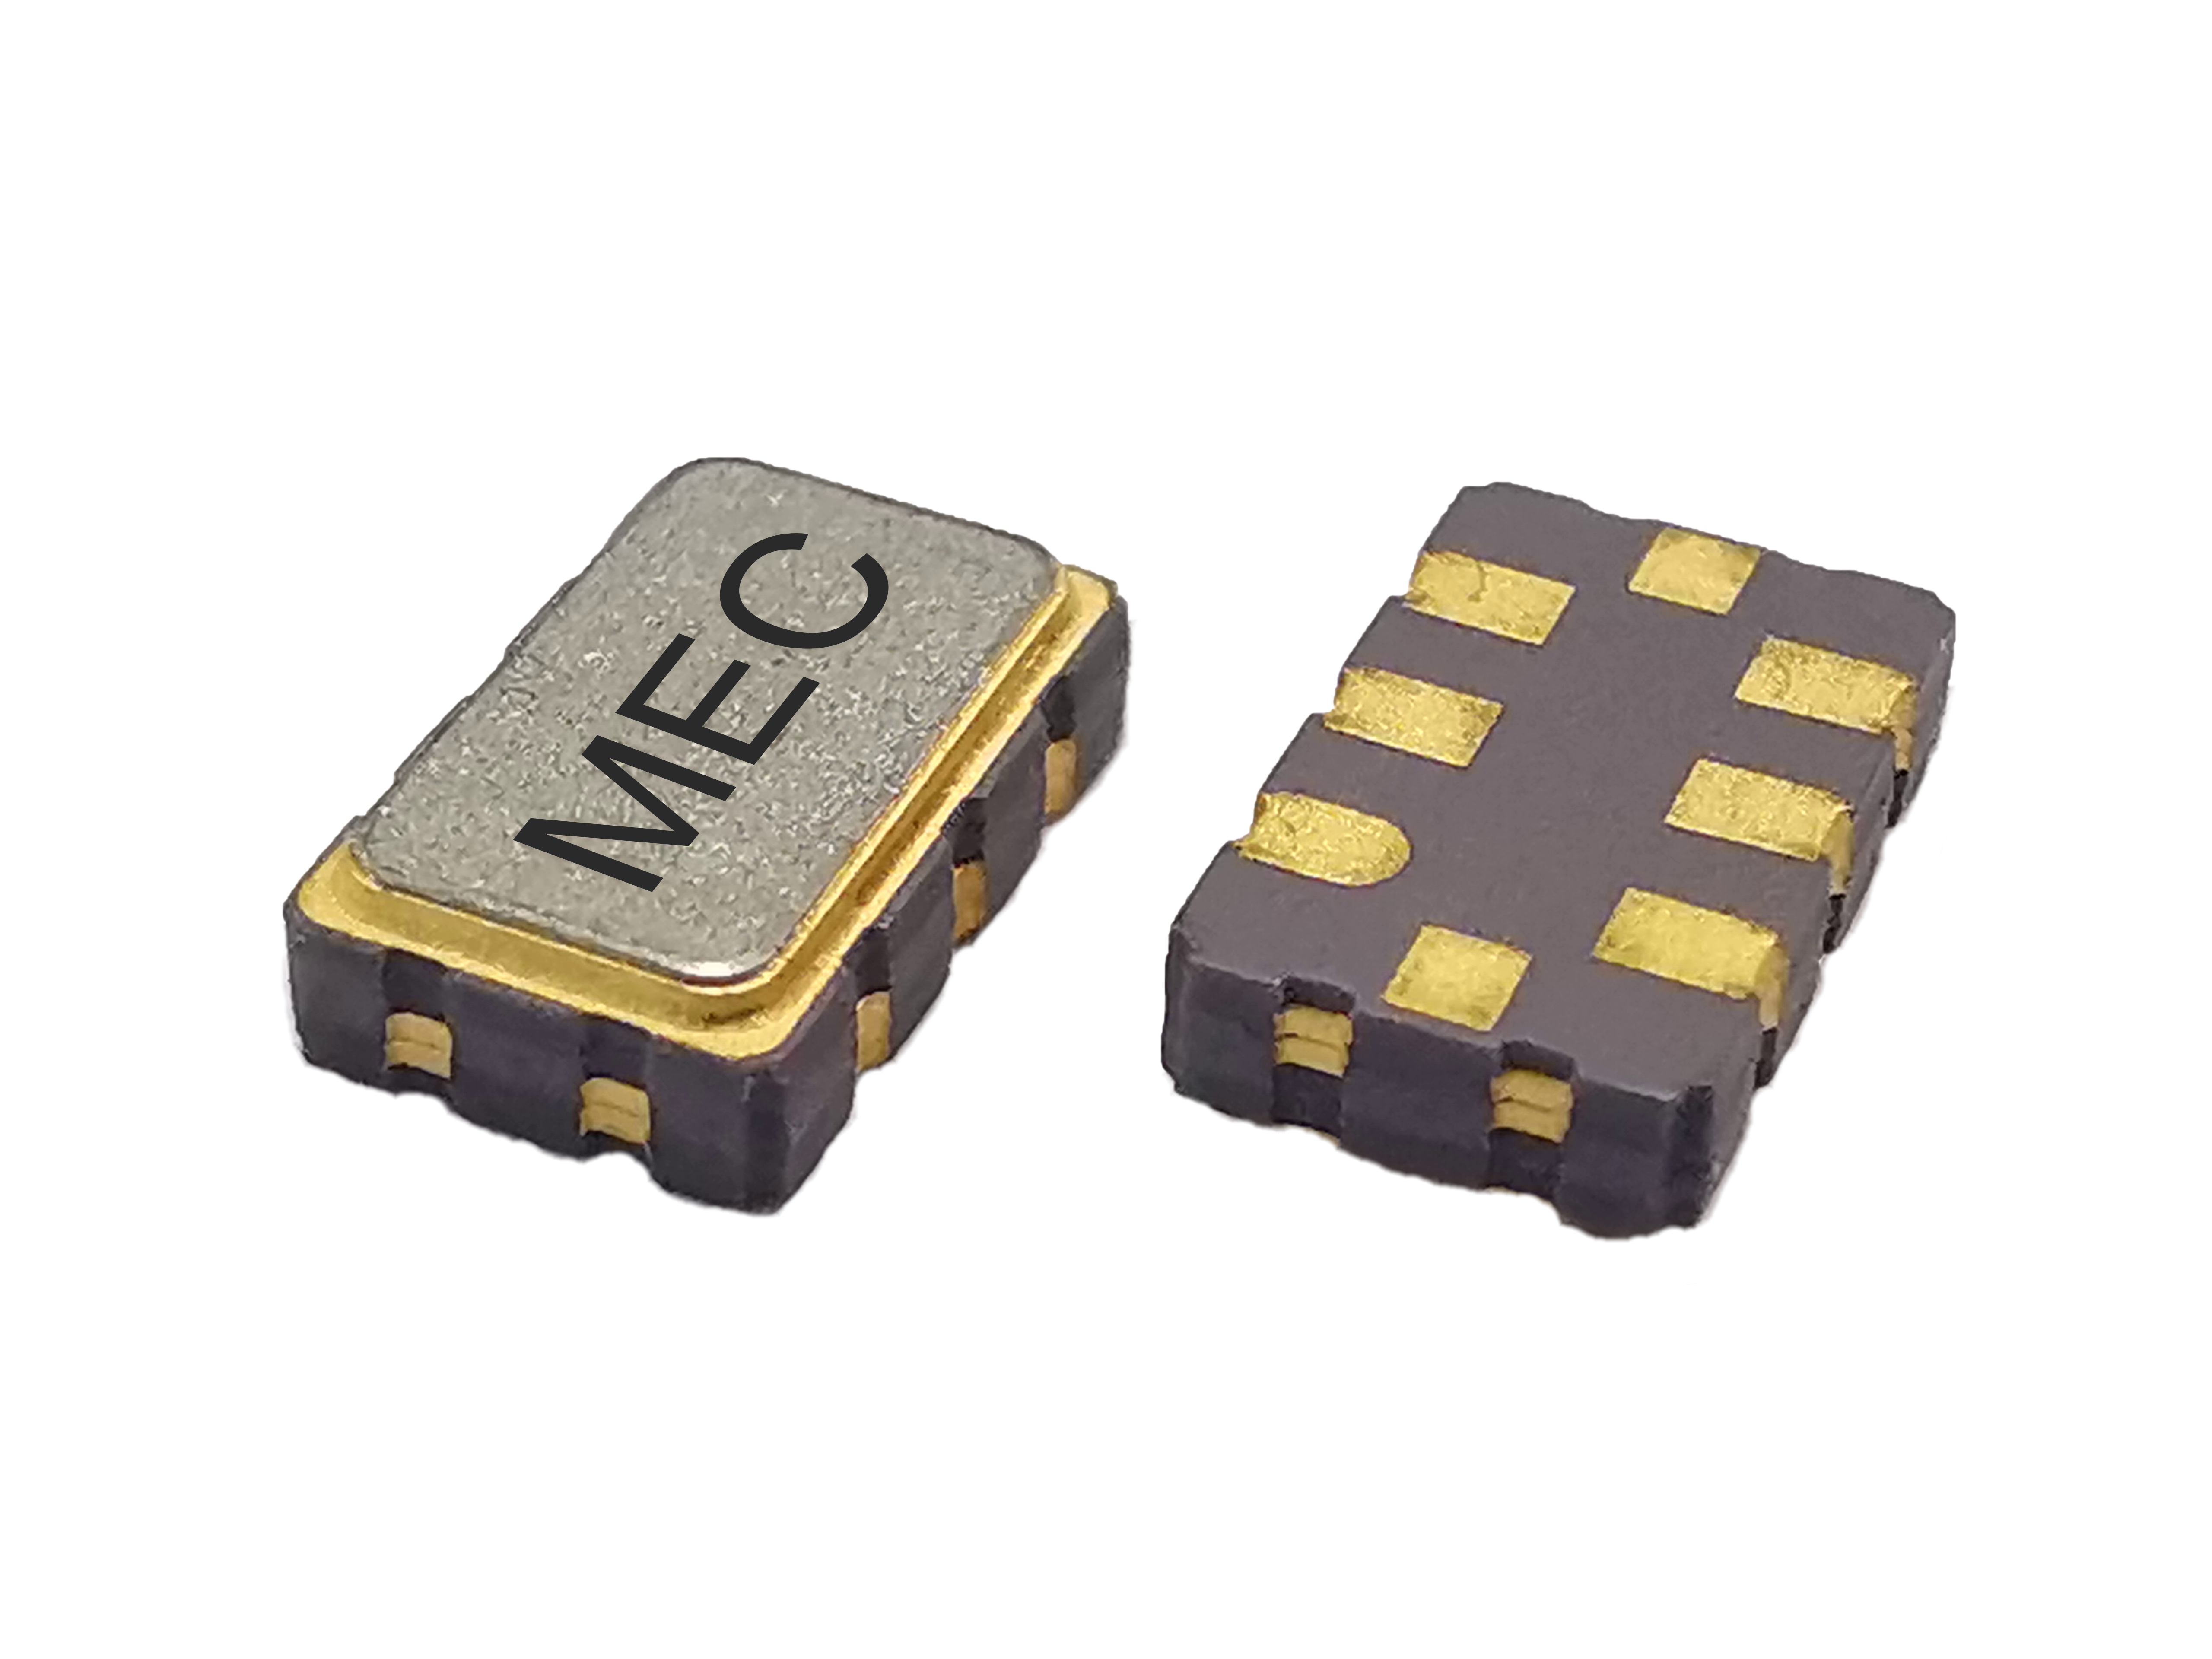 HPJF328 3225 3.3V Ultra Low Jitter Quick-turn Programmable Differential LVPECL SMD Crystal Oscillator